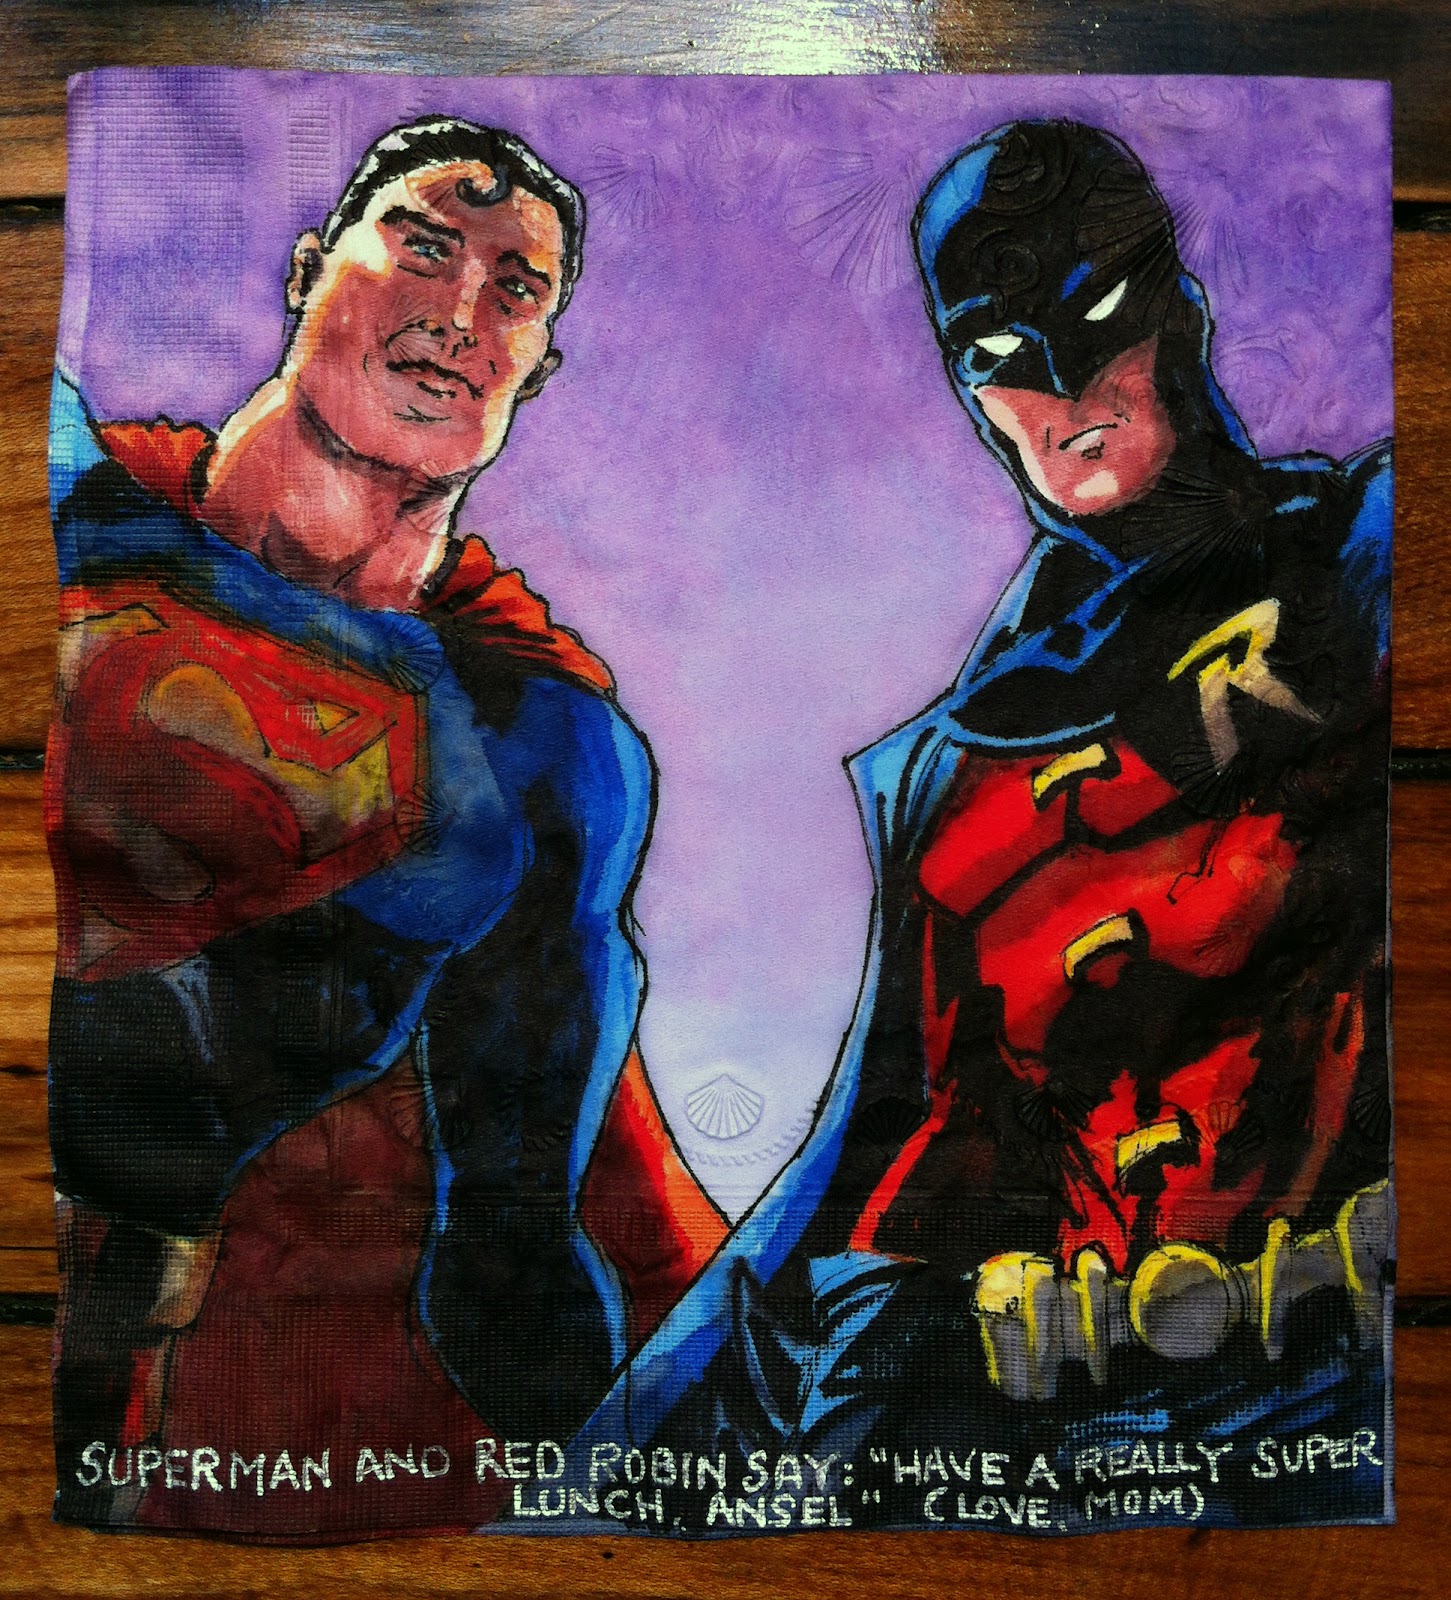 superman - Superman And Red Robin Say "Have A Really Super Lunch, Ansel" Clove Mom